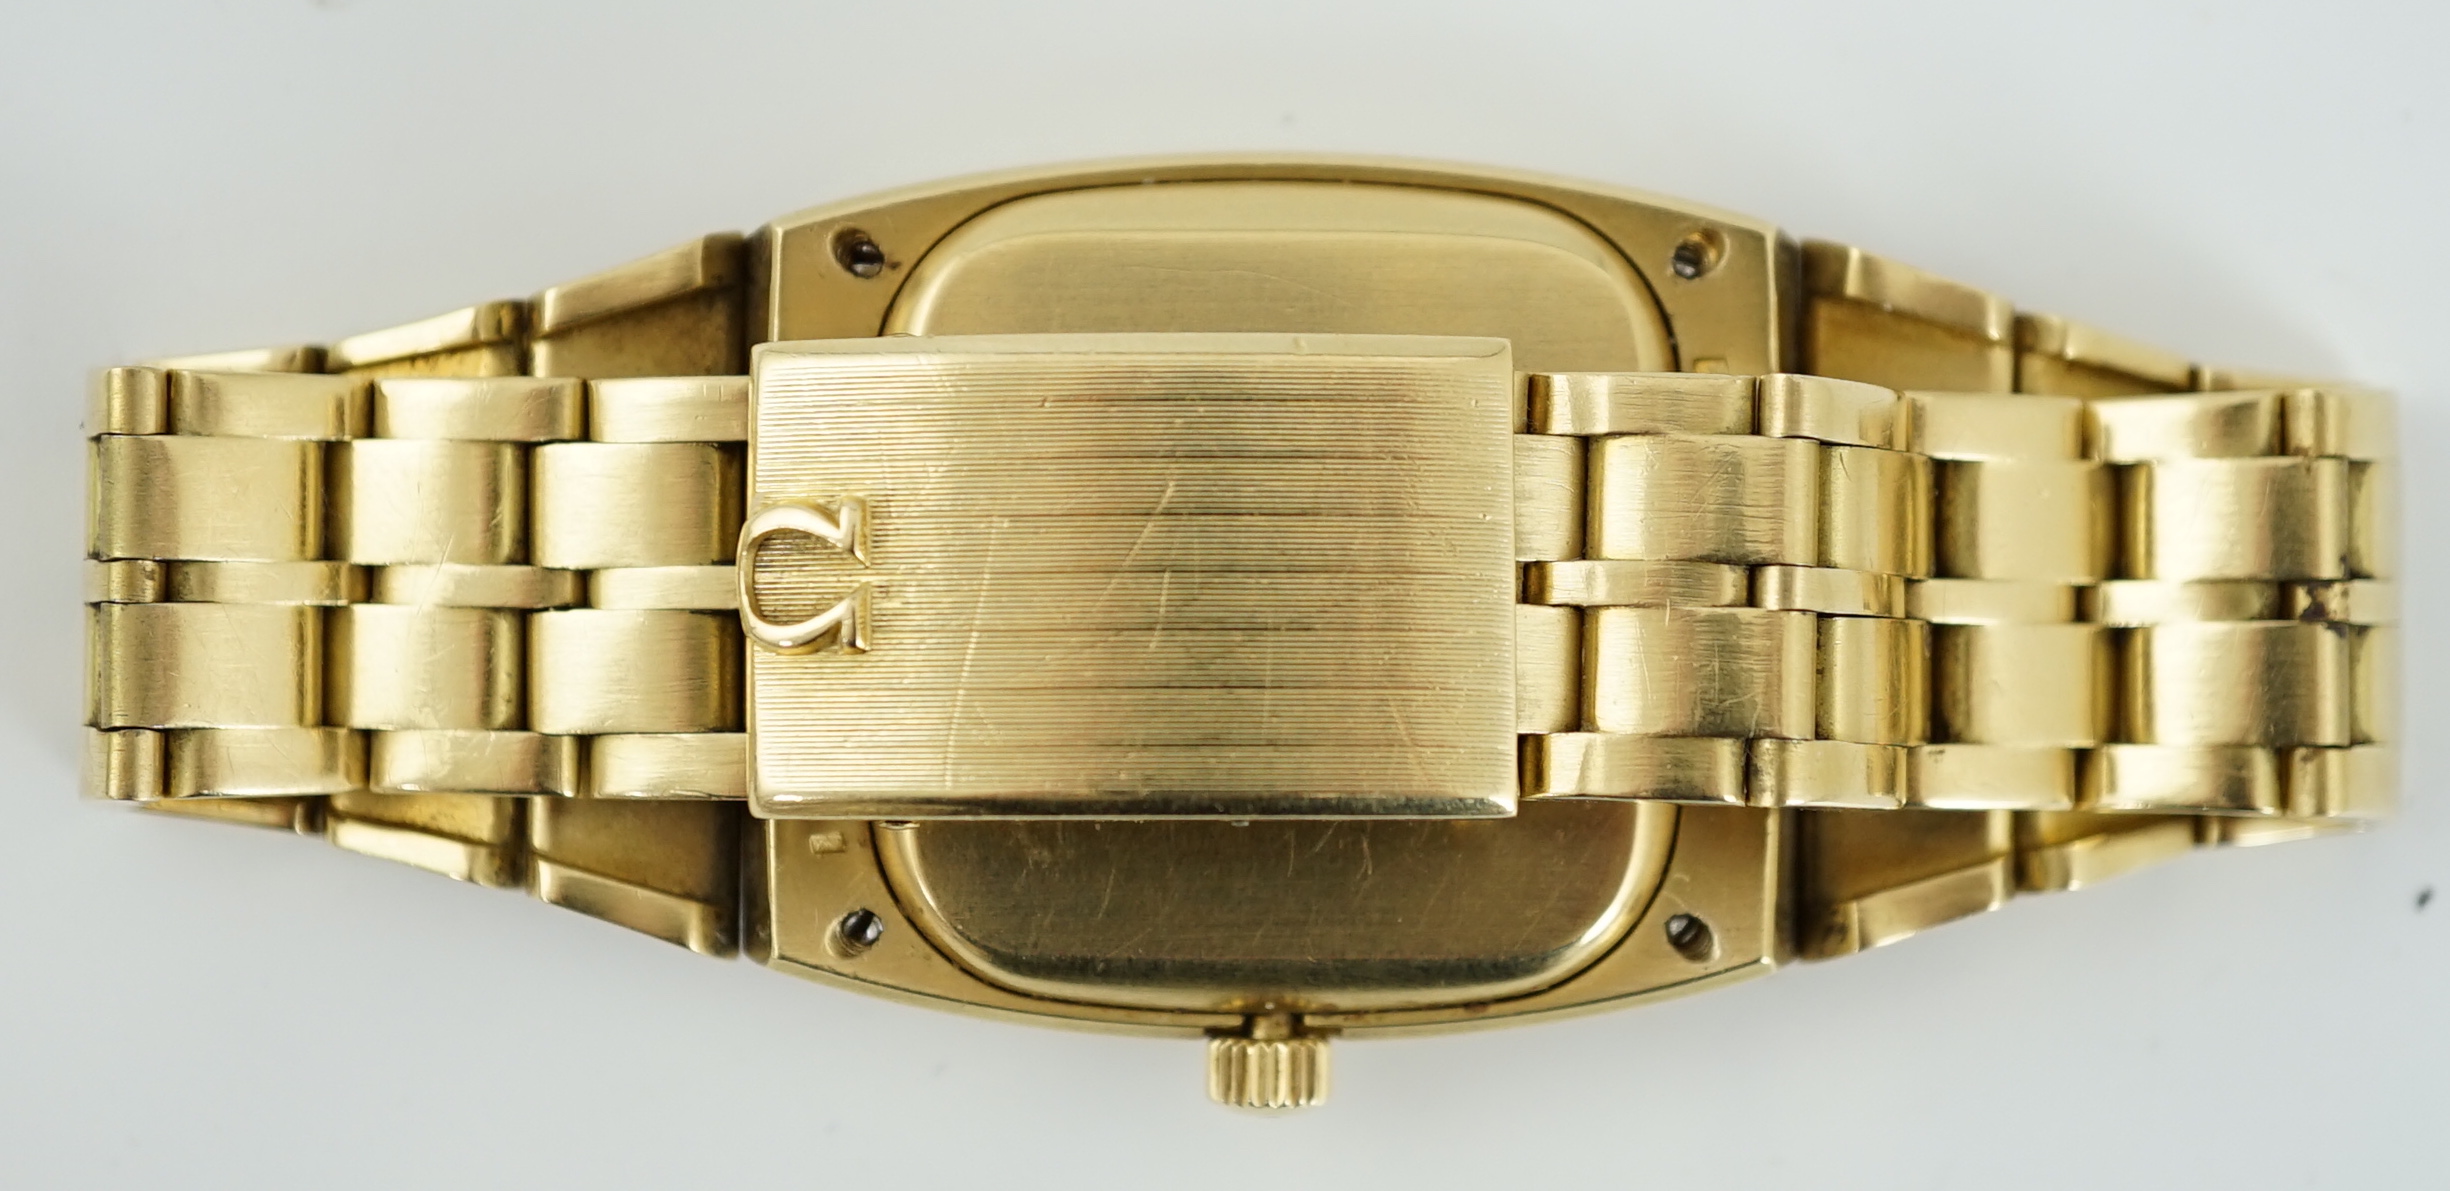 A gentleman's 1970's 18ct gold Omega Constellation automatic wrist watch, on an 18ct gold Omega bracelet